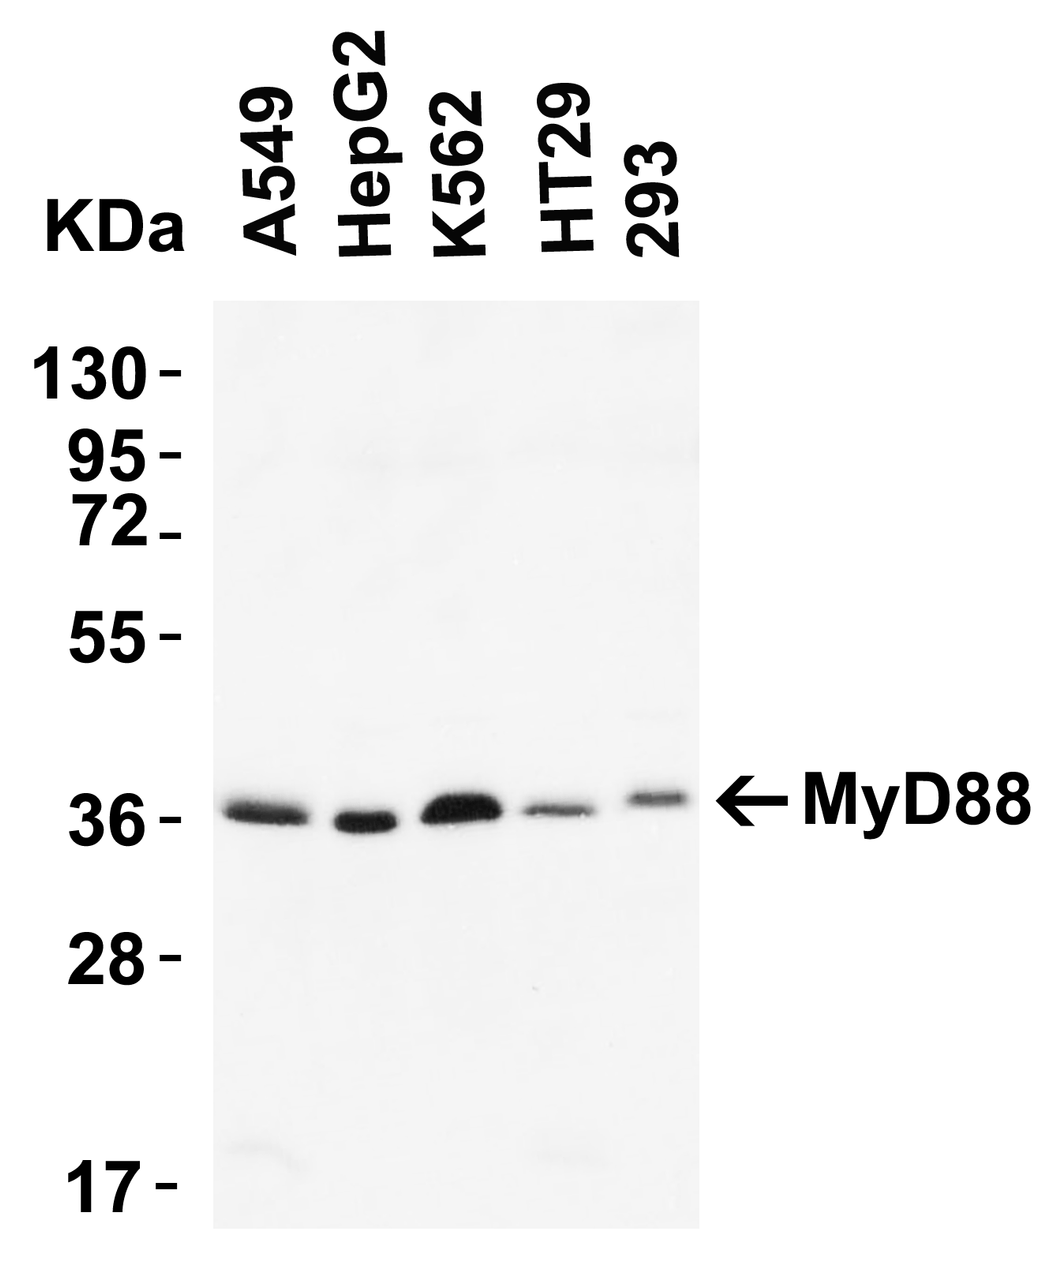 Figure 2 Western Blot Validation of MyD88 in human cell lines
Loading: 15 ug of lysates per lane.
Antibodies: 2127 (2 ug/mL) 1 h incubation at RT in 5% NFDM/TBST.
Secondary: Goat anti-rabbit IgG HRP conjugate at 1:10000 dilution.
Predicted band size: 35 kDa